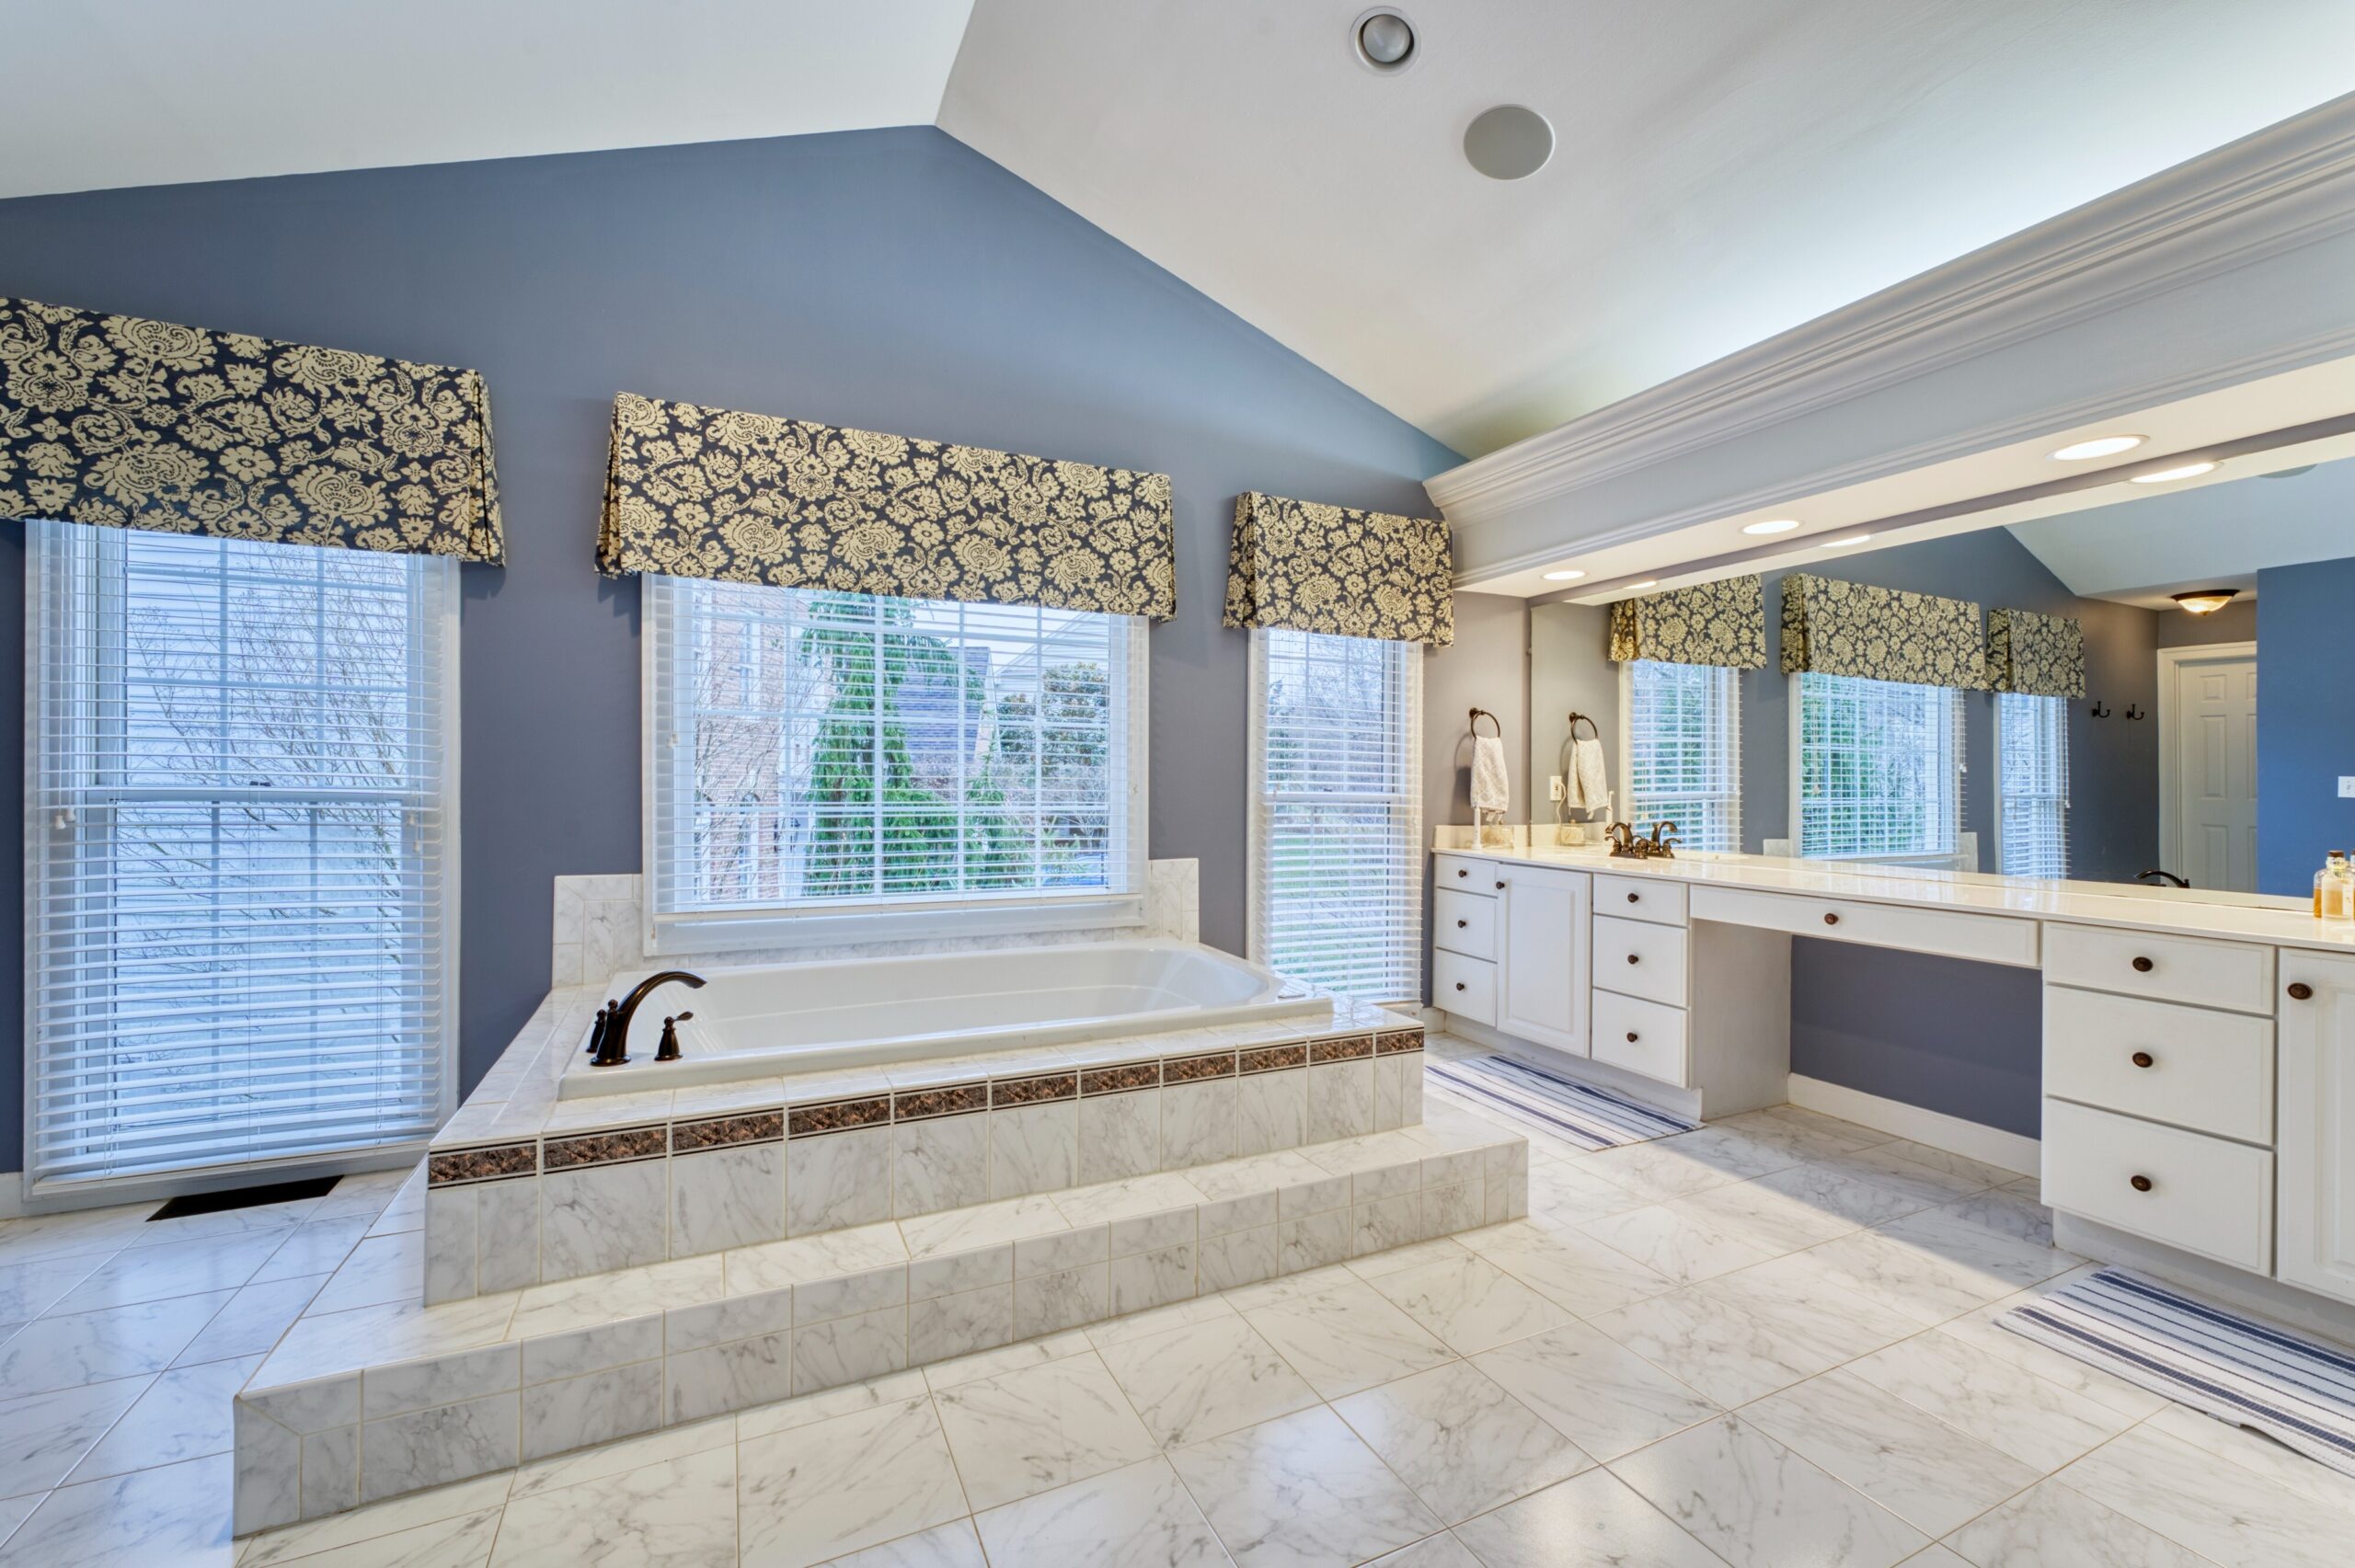 Professional interior photo of 47572 Compton Circle, Sterling, VA - showing the primary bathroom with a large tub in the center of the room against the windows